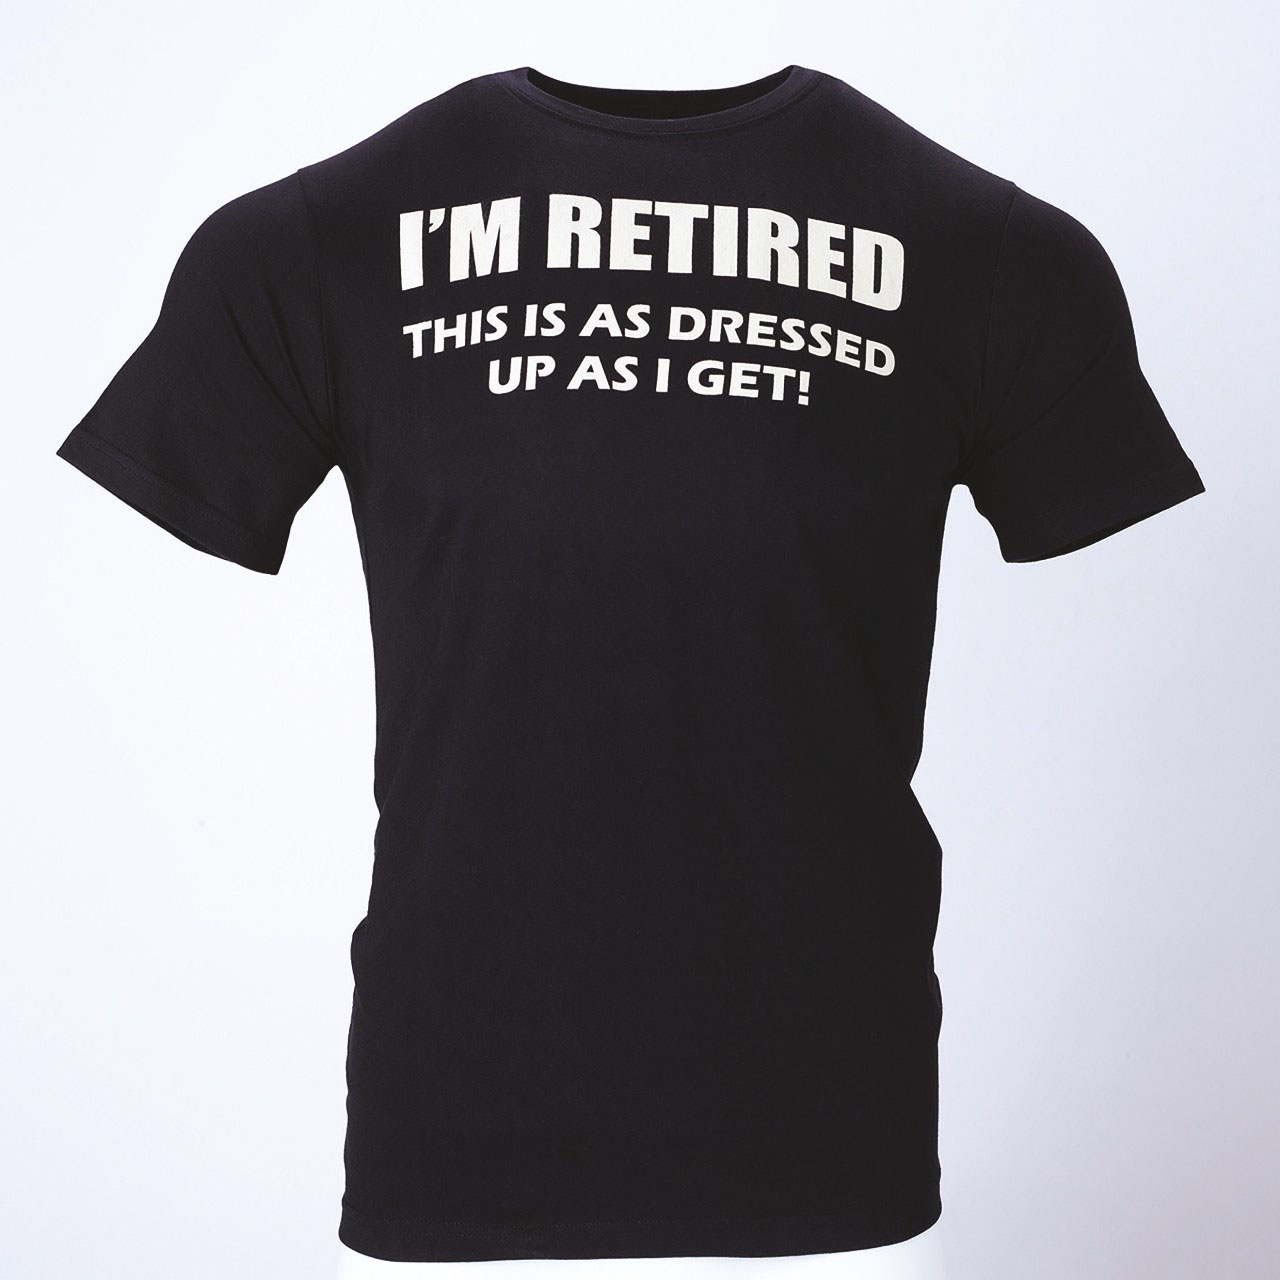 T-shirt - I'm Retired This is as Dressed up as I get